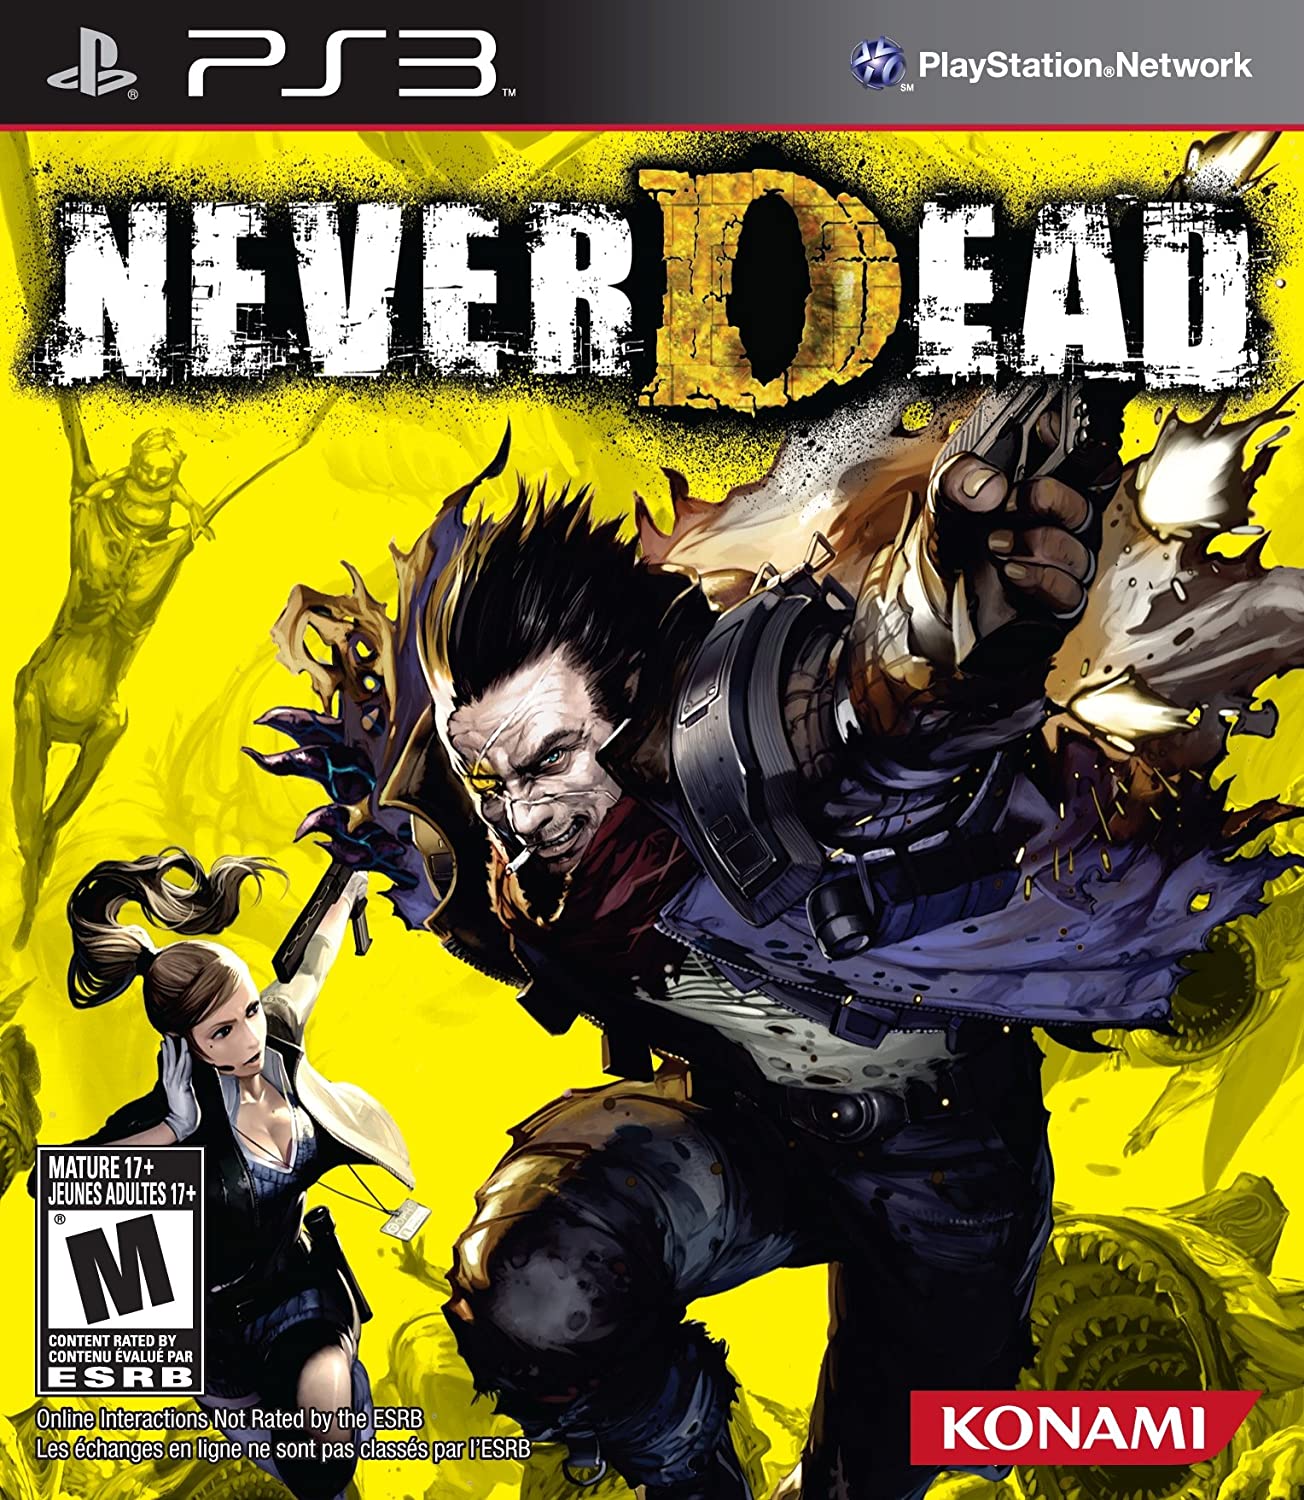 Never Dead PS3